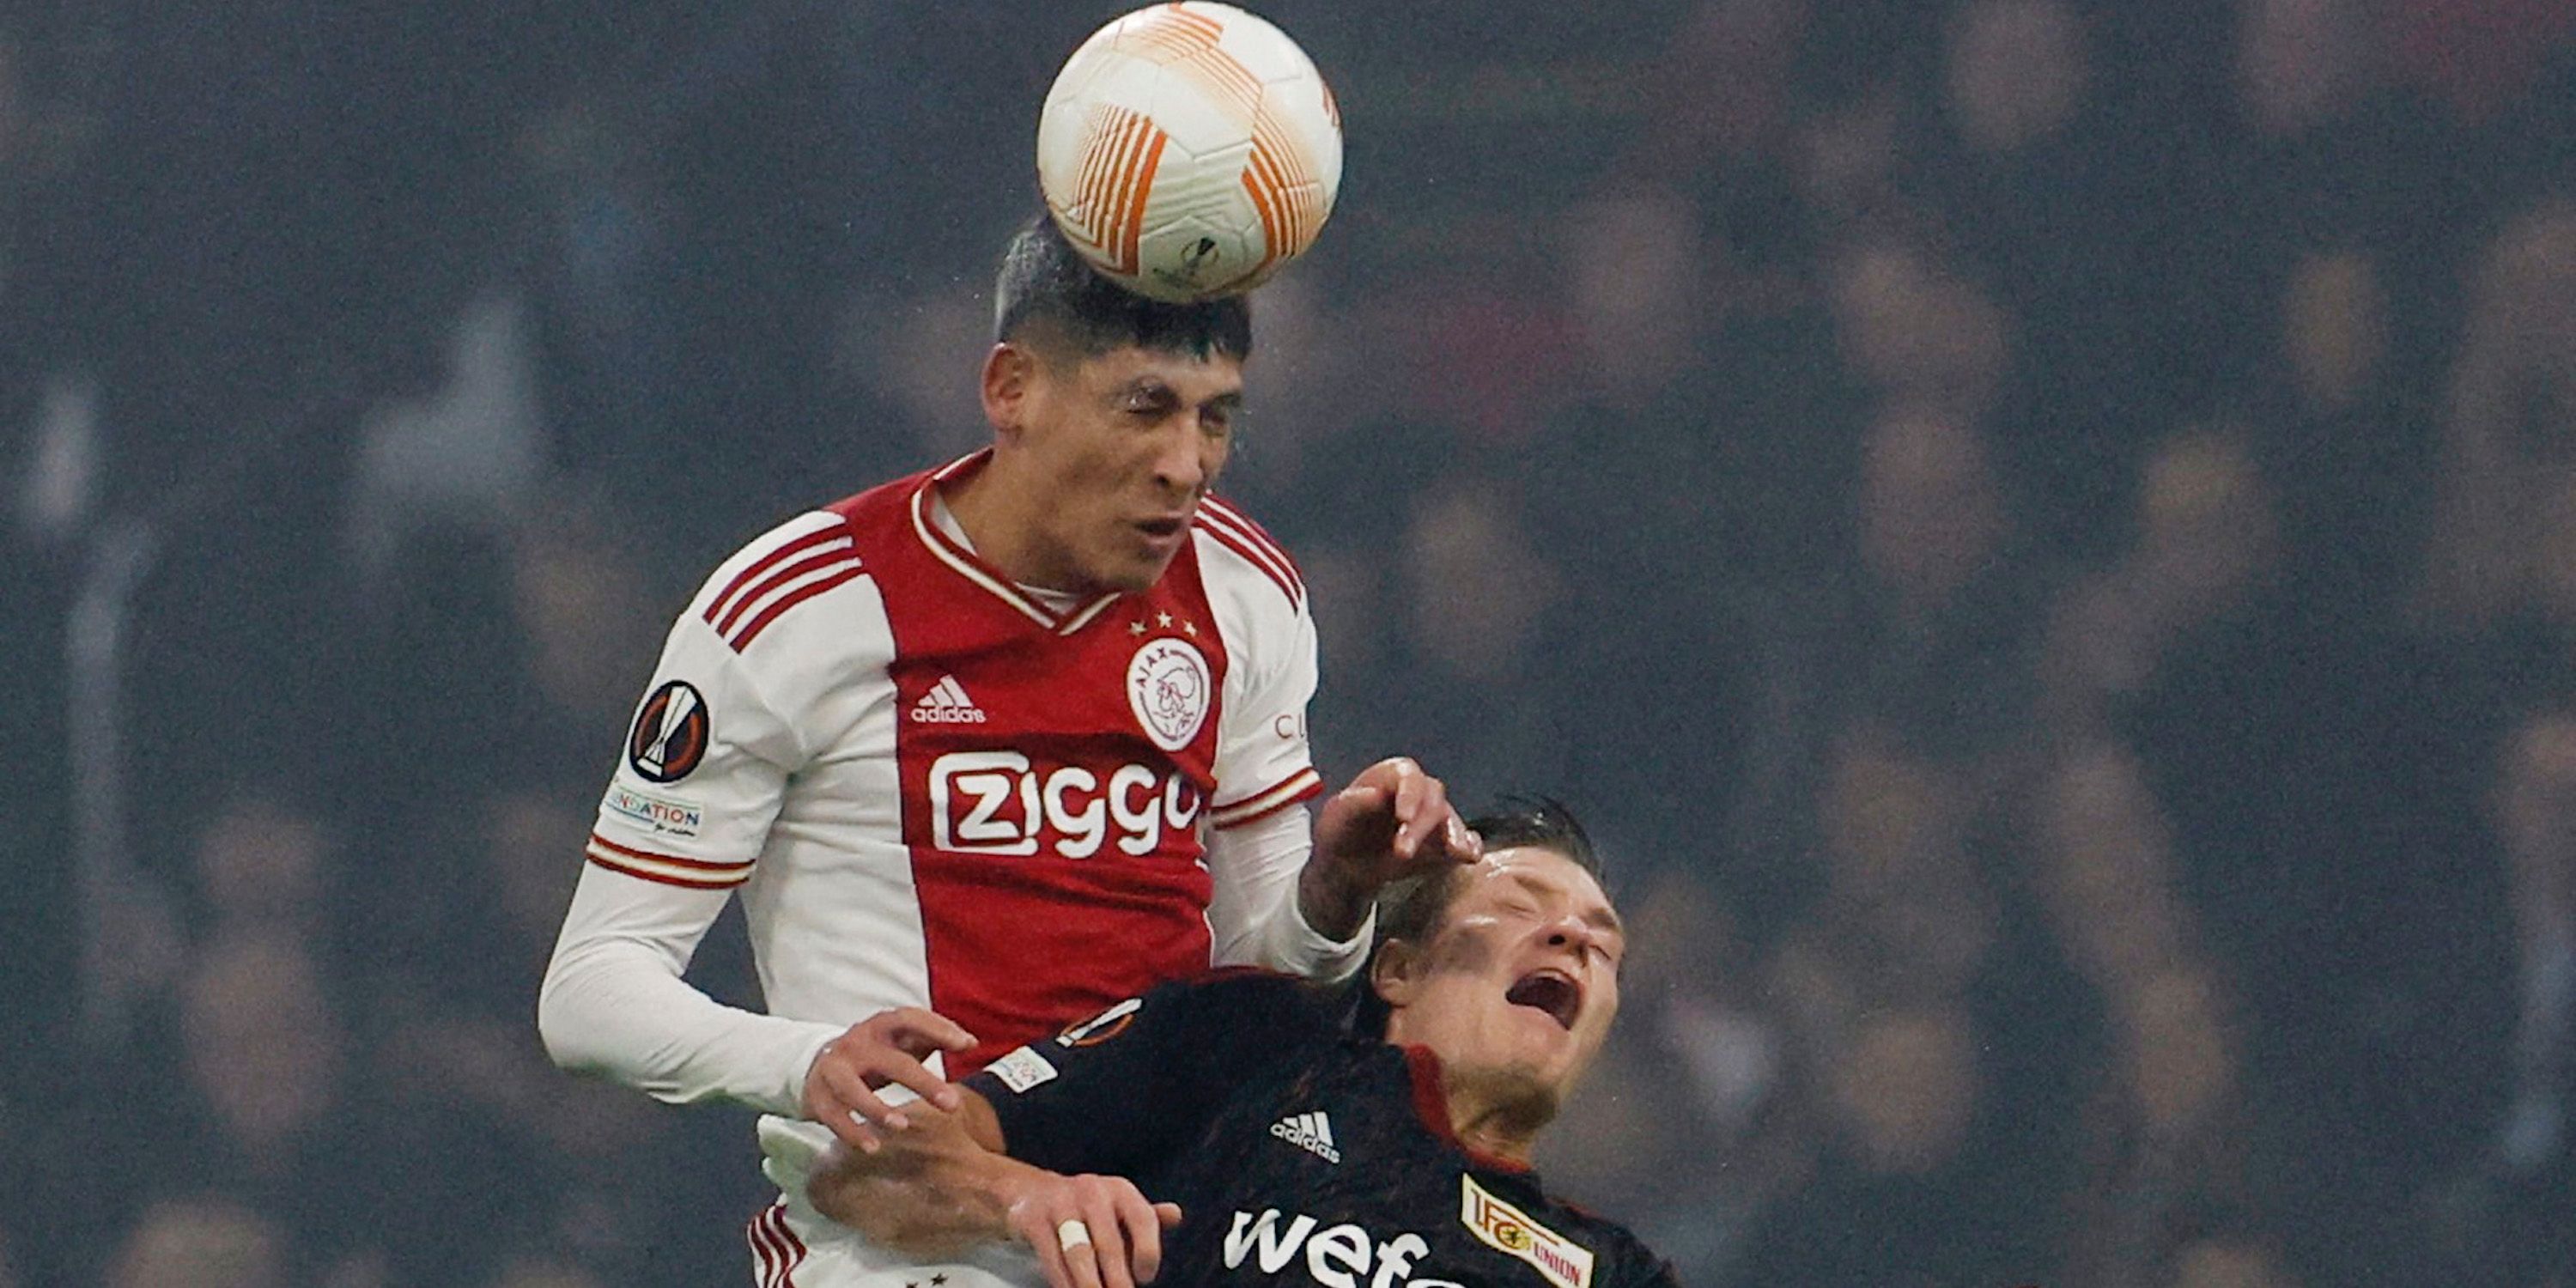 Ajax Amsterdam's Edson Alvarez in action with 1. FC Union Berlin's Kevin Behrens